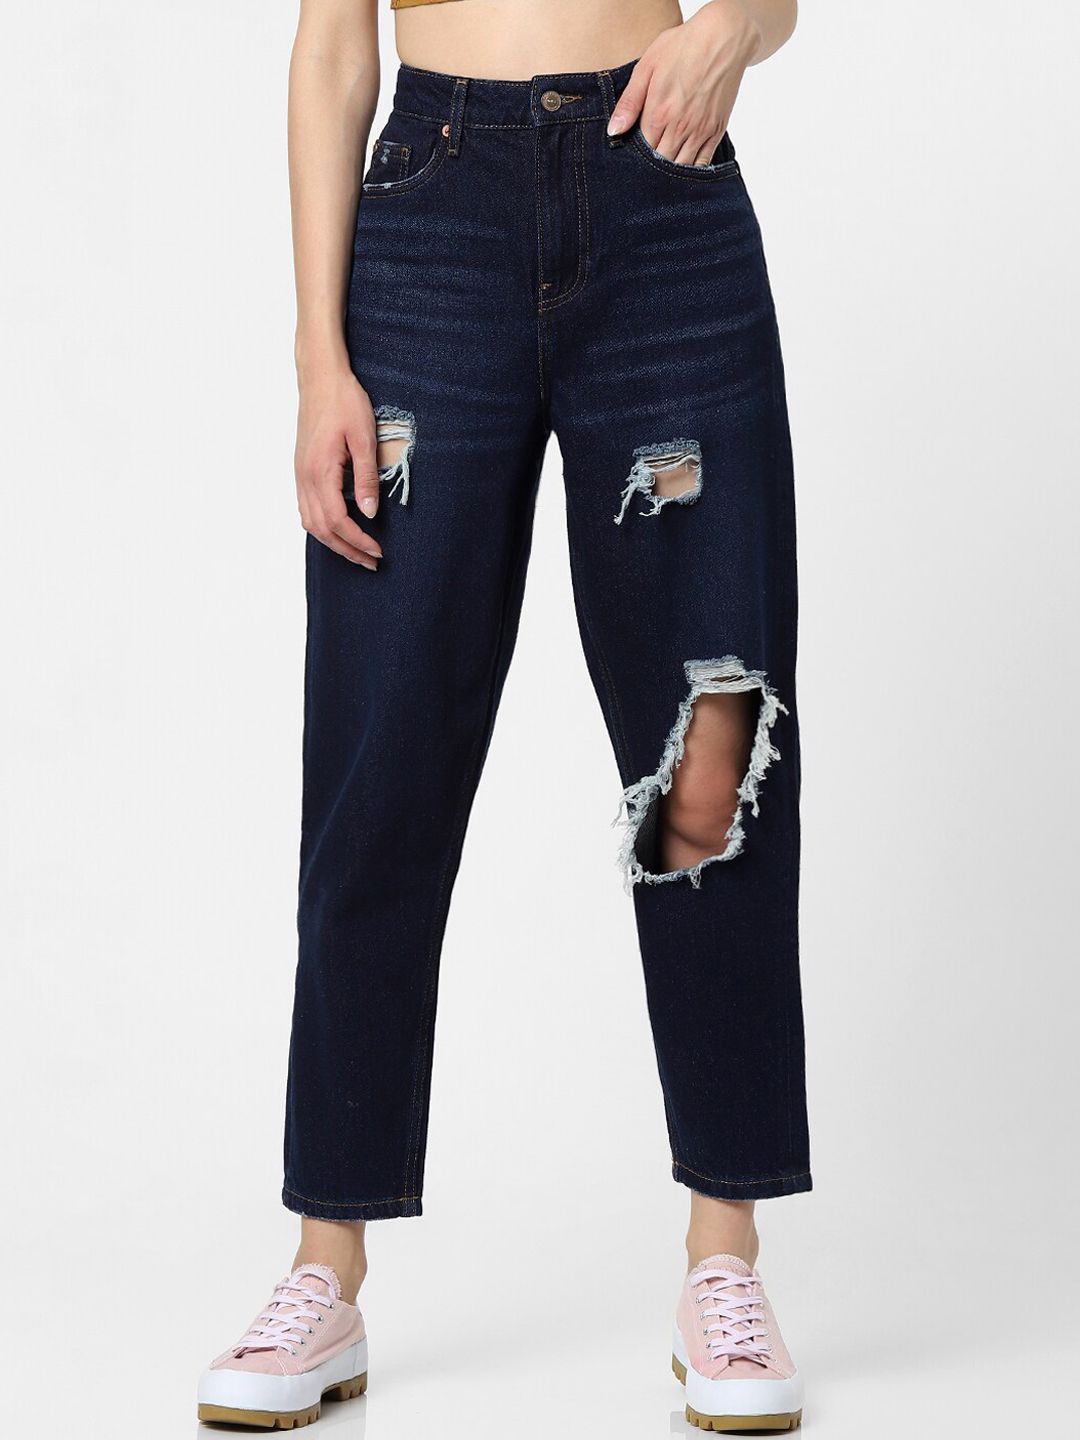 ONLY Women Blue High-Rise Highly Distressed Stretchable Jeans Price in India